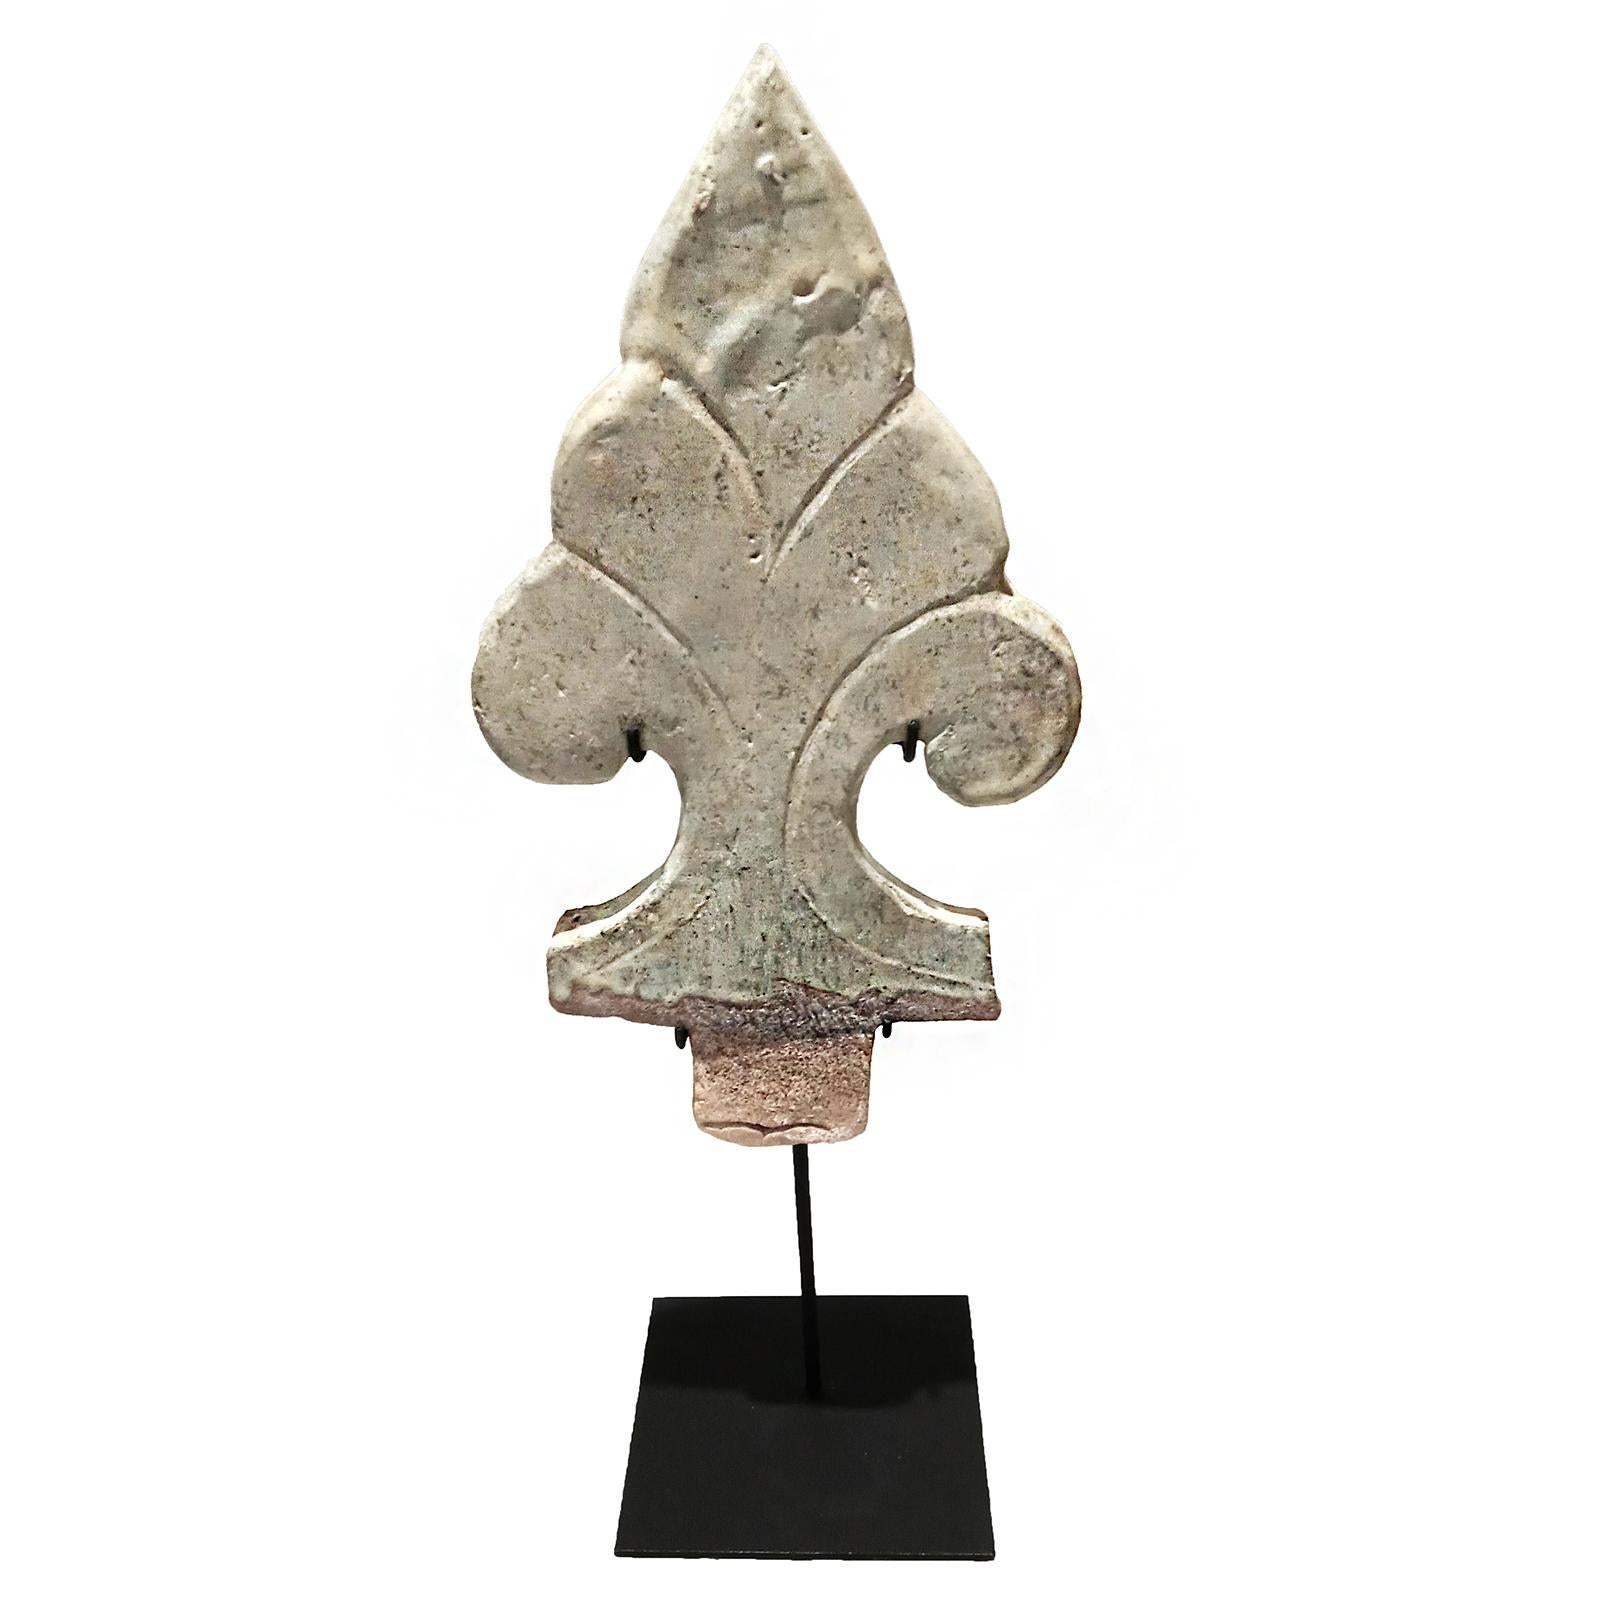 A shield-shaped antefix from Thailand, early 19th century. 

Reclaimed from old constructions and preserved in time, these architectural details were a decorative staple in many traditional Thai buildings, particularly temples, pagodas and homes.